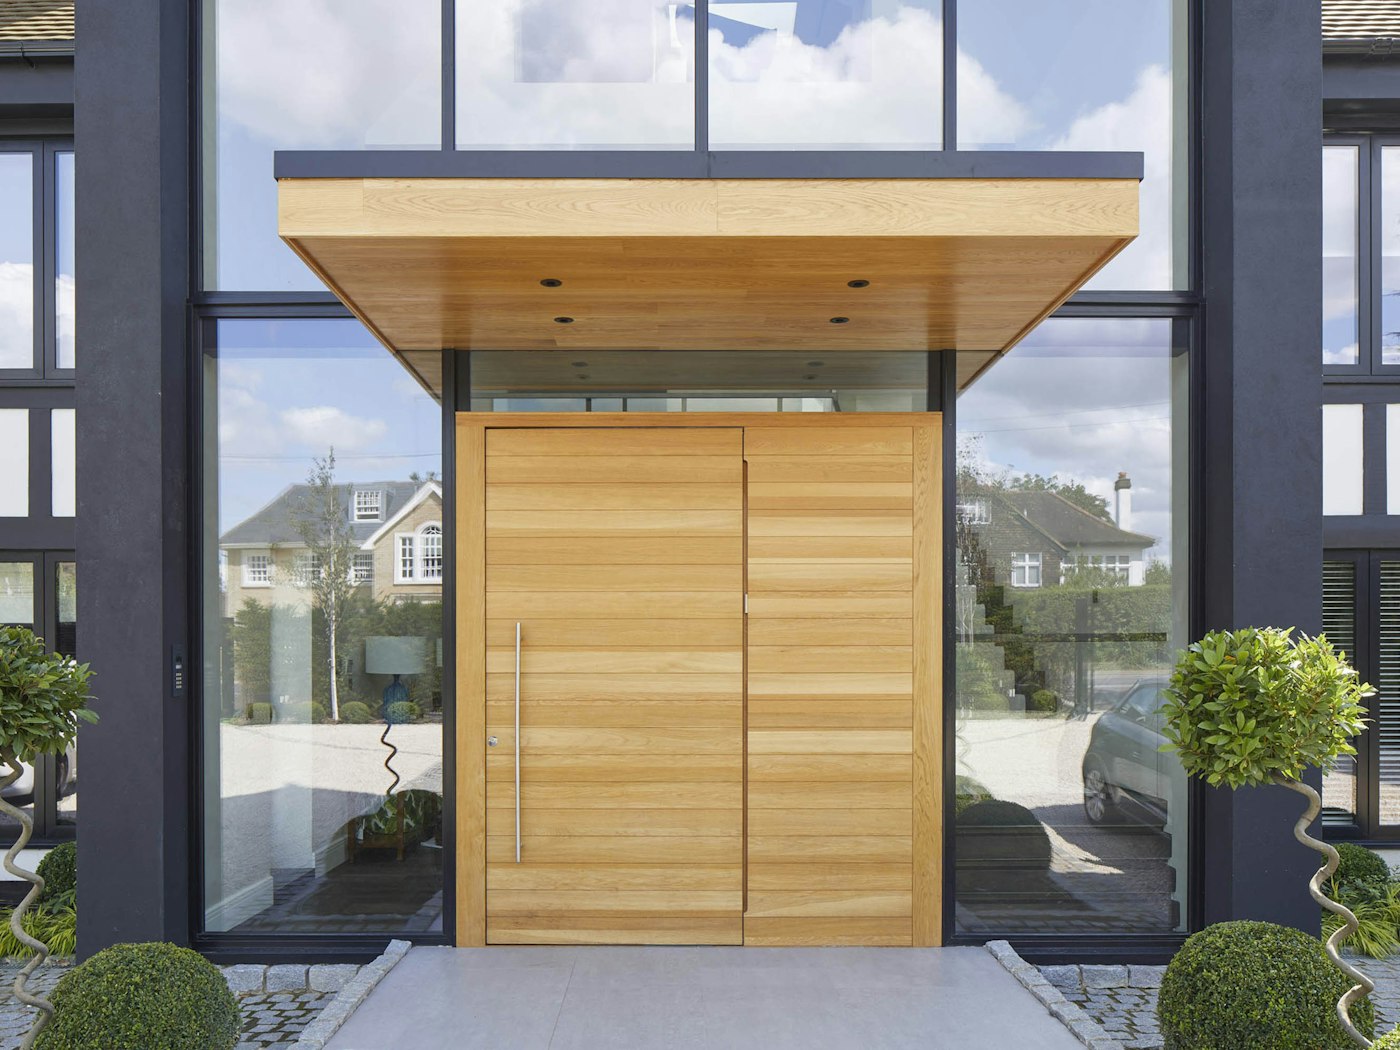 This metal & wooden front door canopy extends a long way in front of this pivot door to give shelter from sun & rain